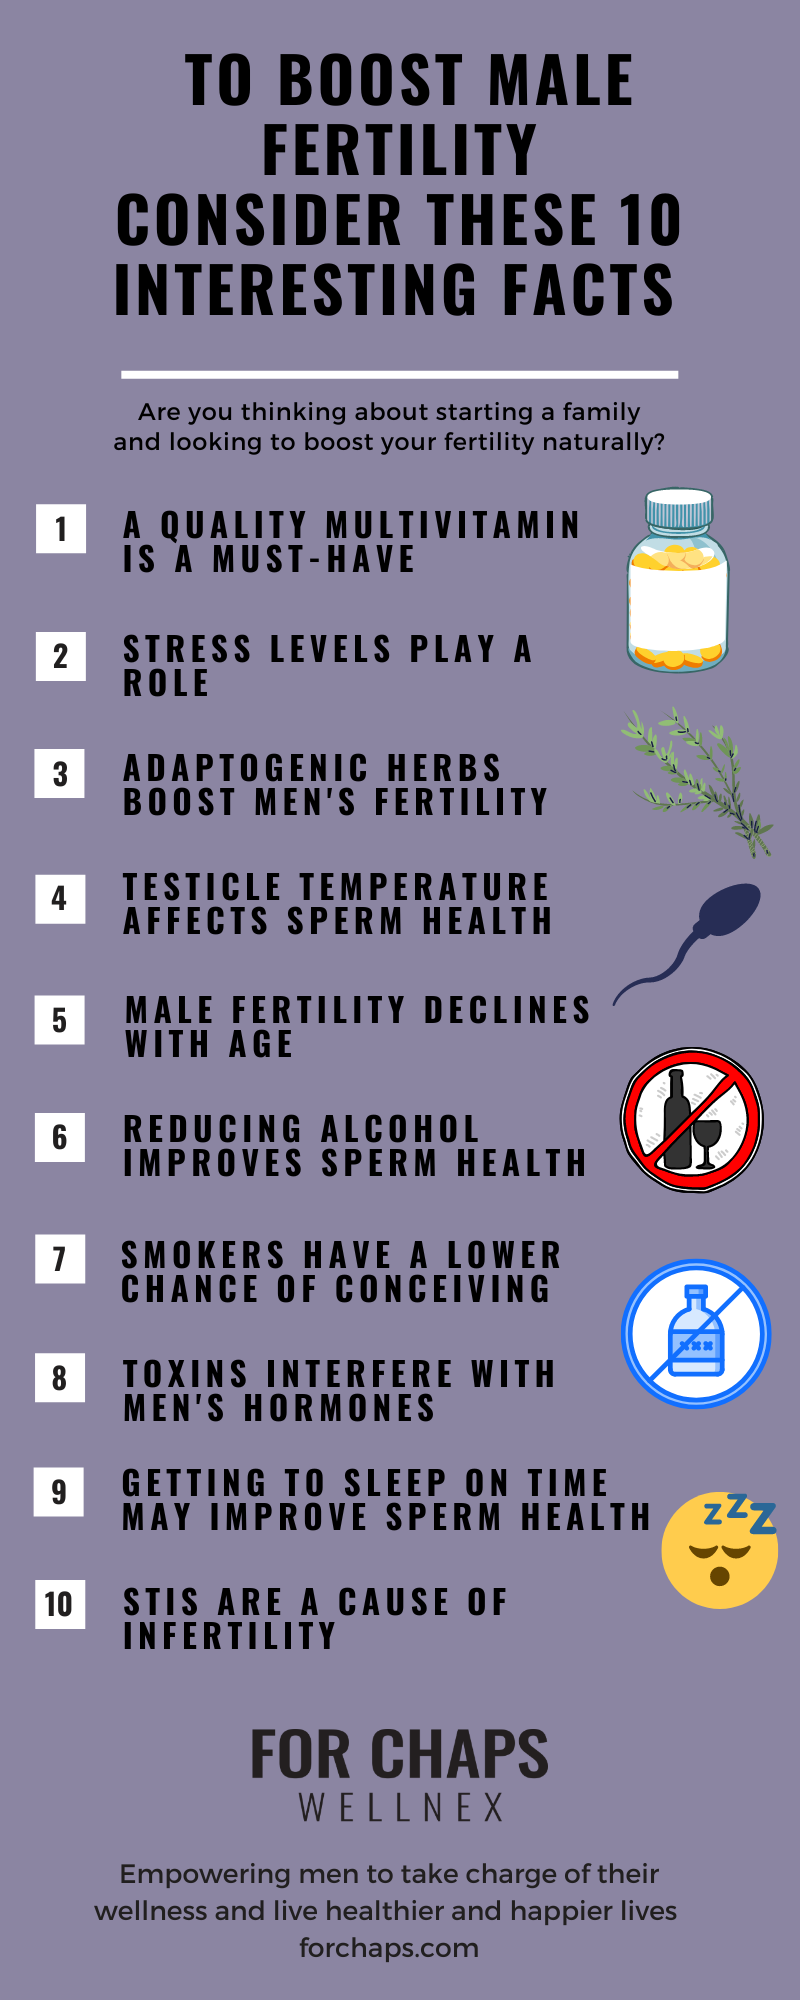 10 Interesting Facts To Boost Male Fertility